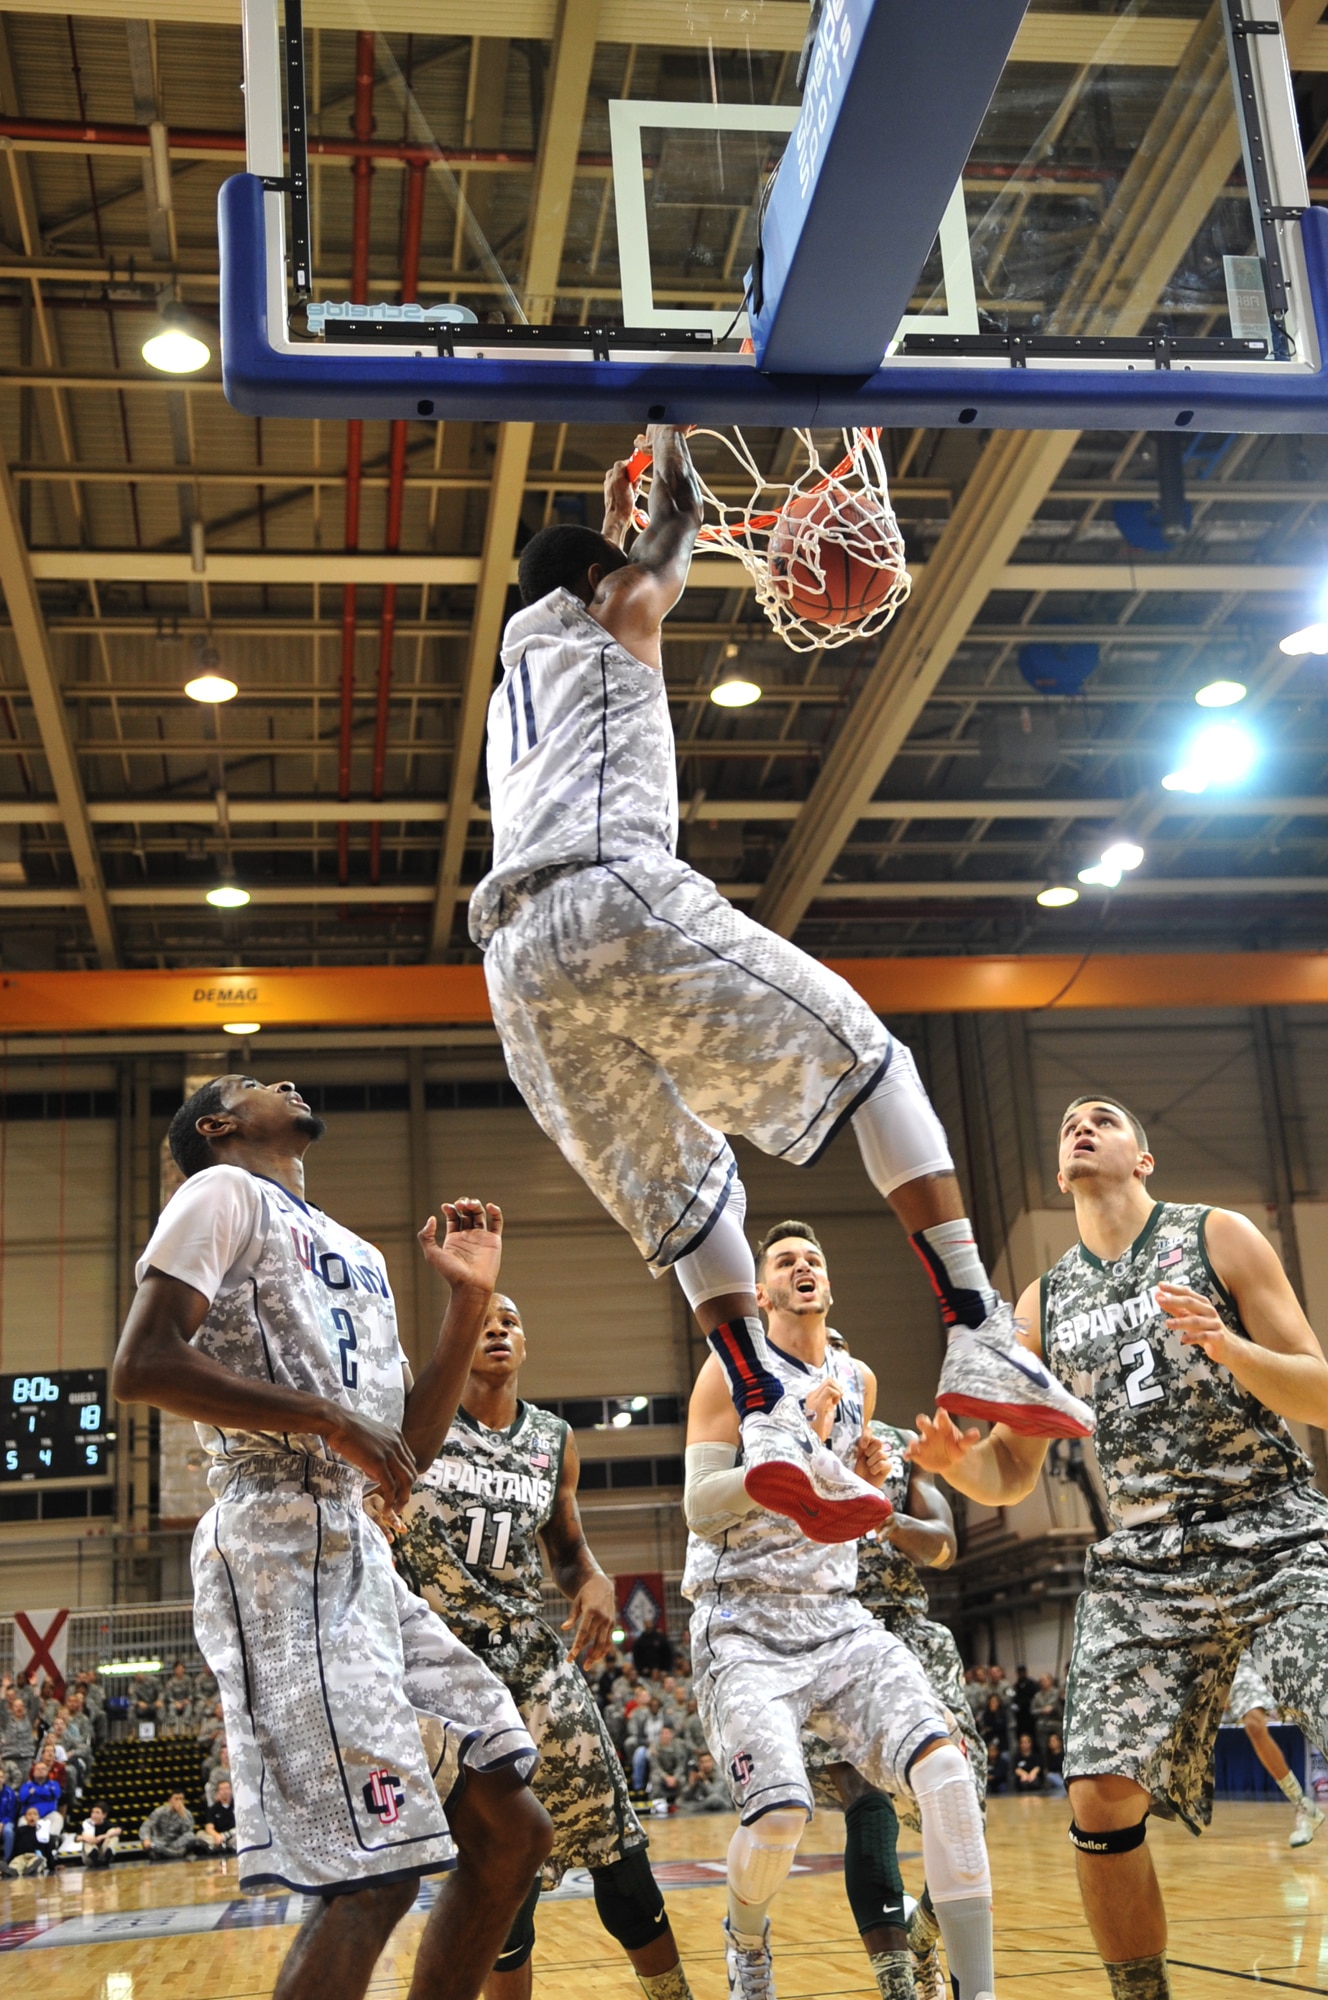 University of Connecticut player Ryan Boatright dunks the ball against the Michigan State Spartans during t the Armed Forces Classic basketball game at Ramstein Air Base, Germany, Nov. 10, 2012.  Connecticut overcame Michigan 66-62. (U.S. Air Force photo/Master Sgt. Wayne Clark)